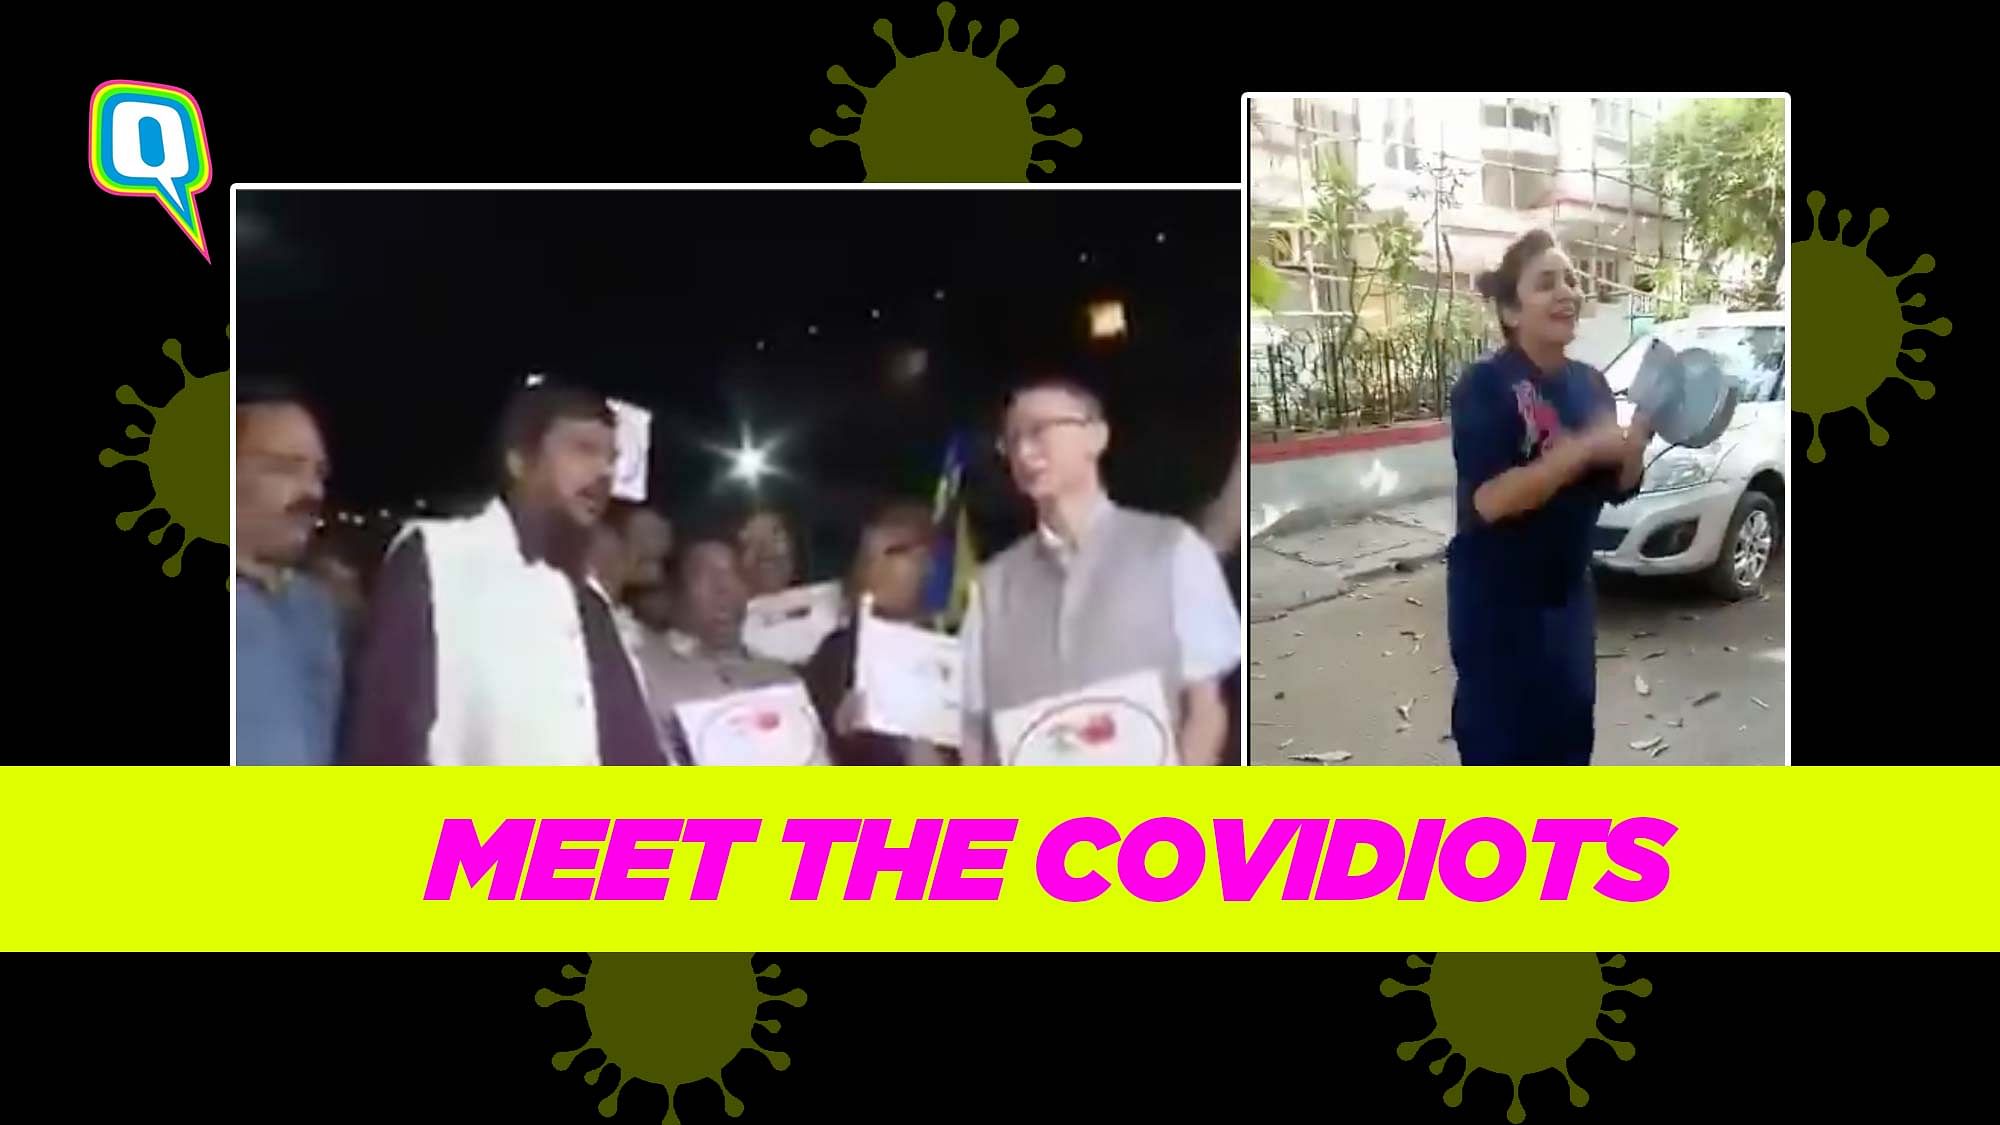 Who are these ‘covidiots’?